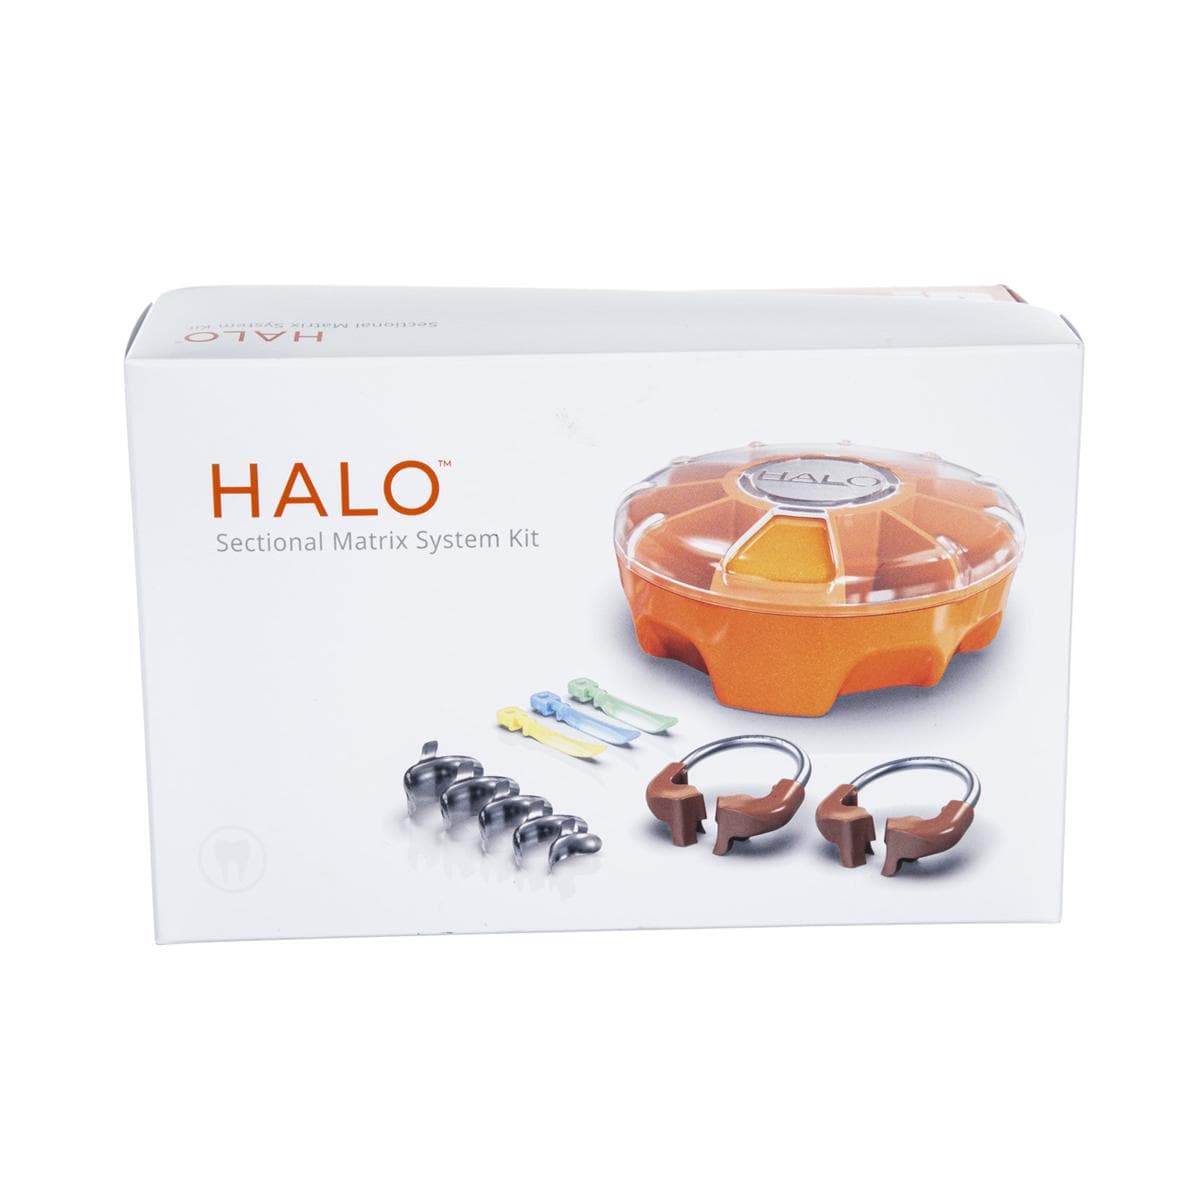 HALO Sectional Matrix Kit - Original bands, with instruments